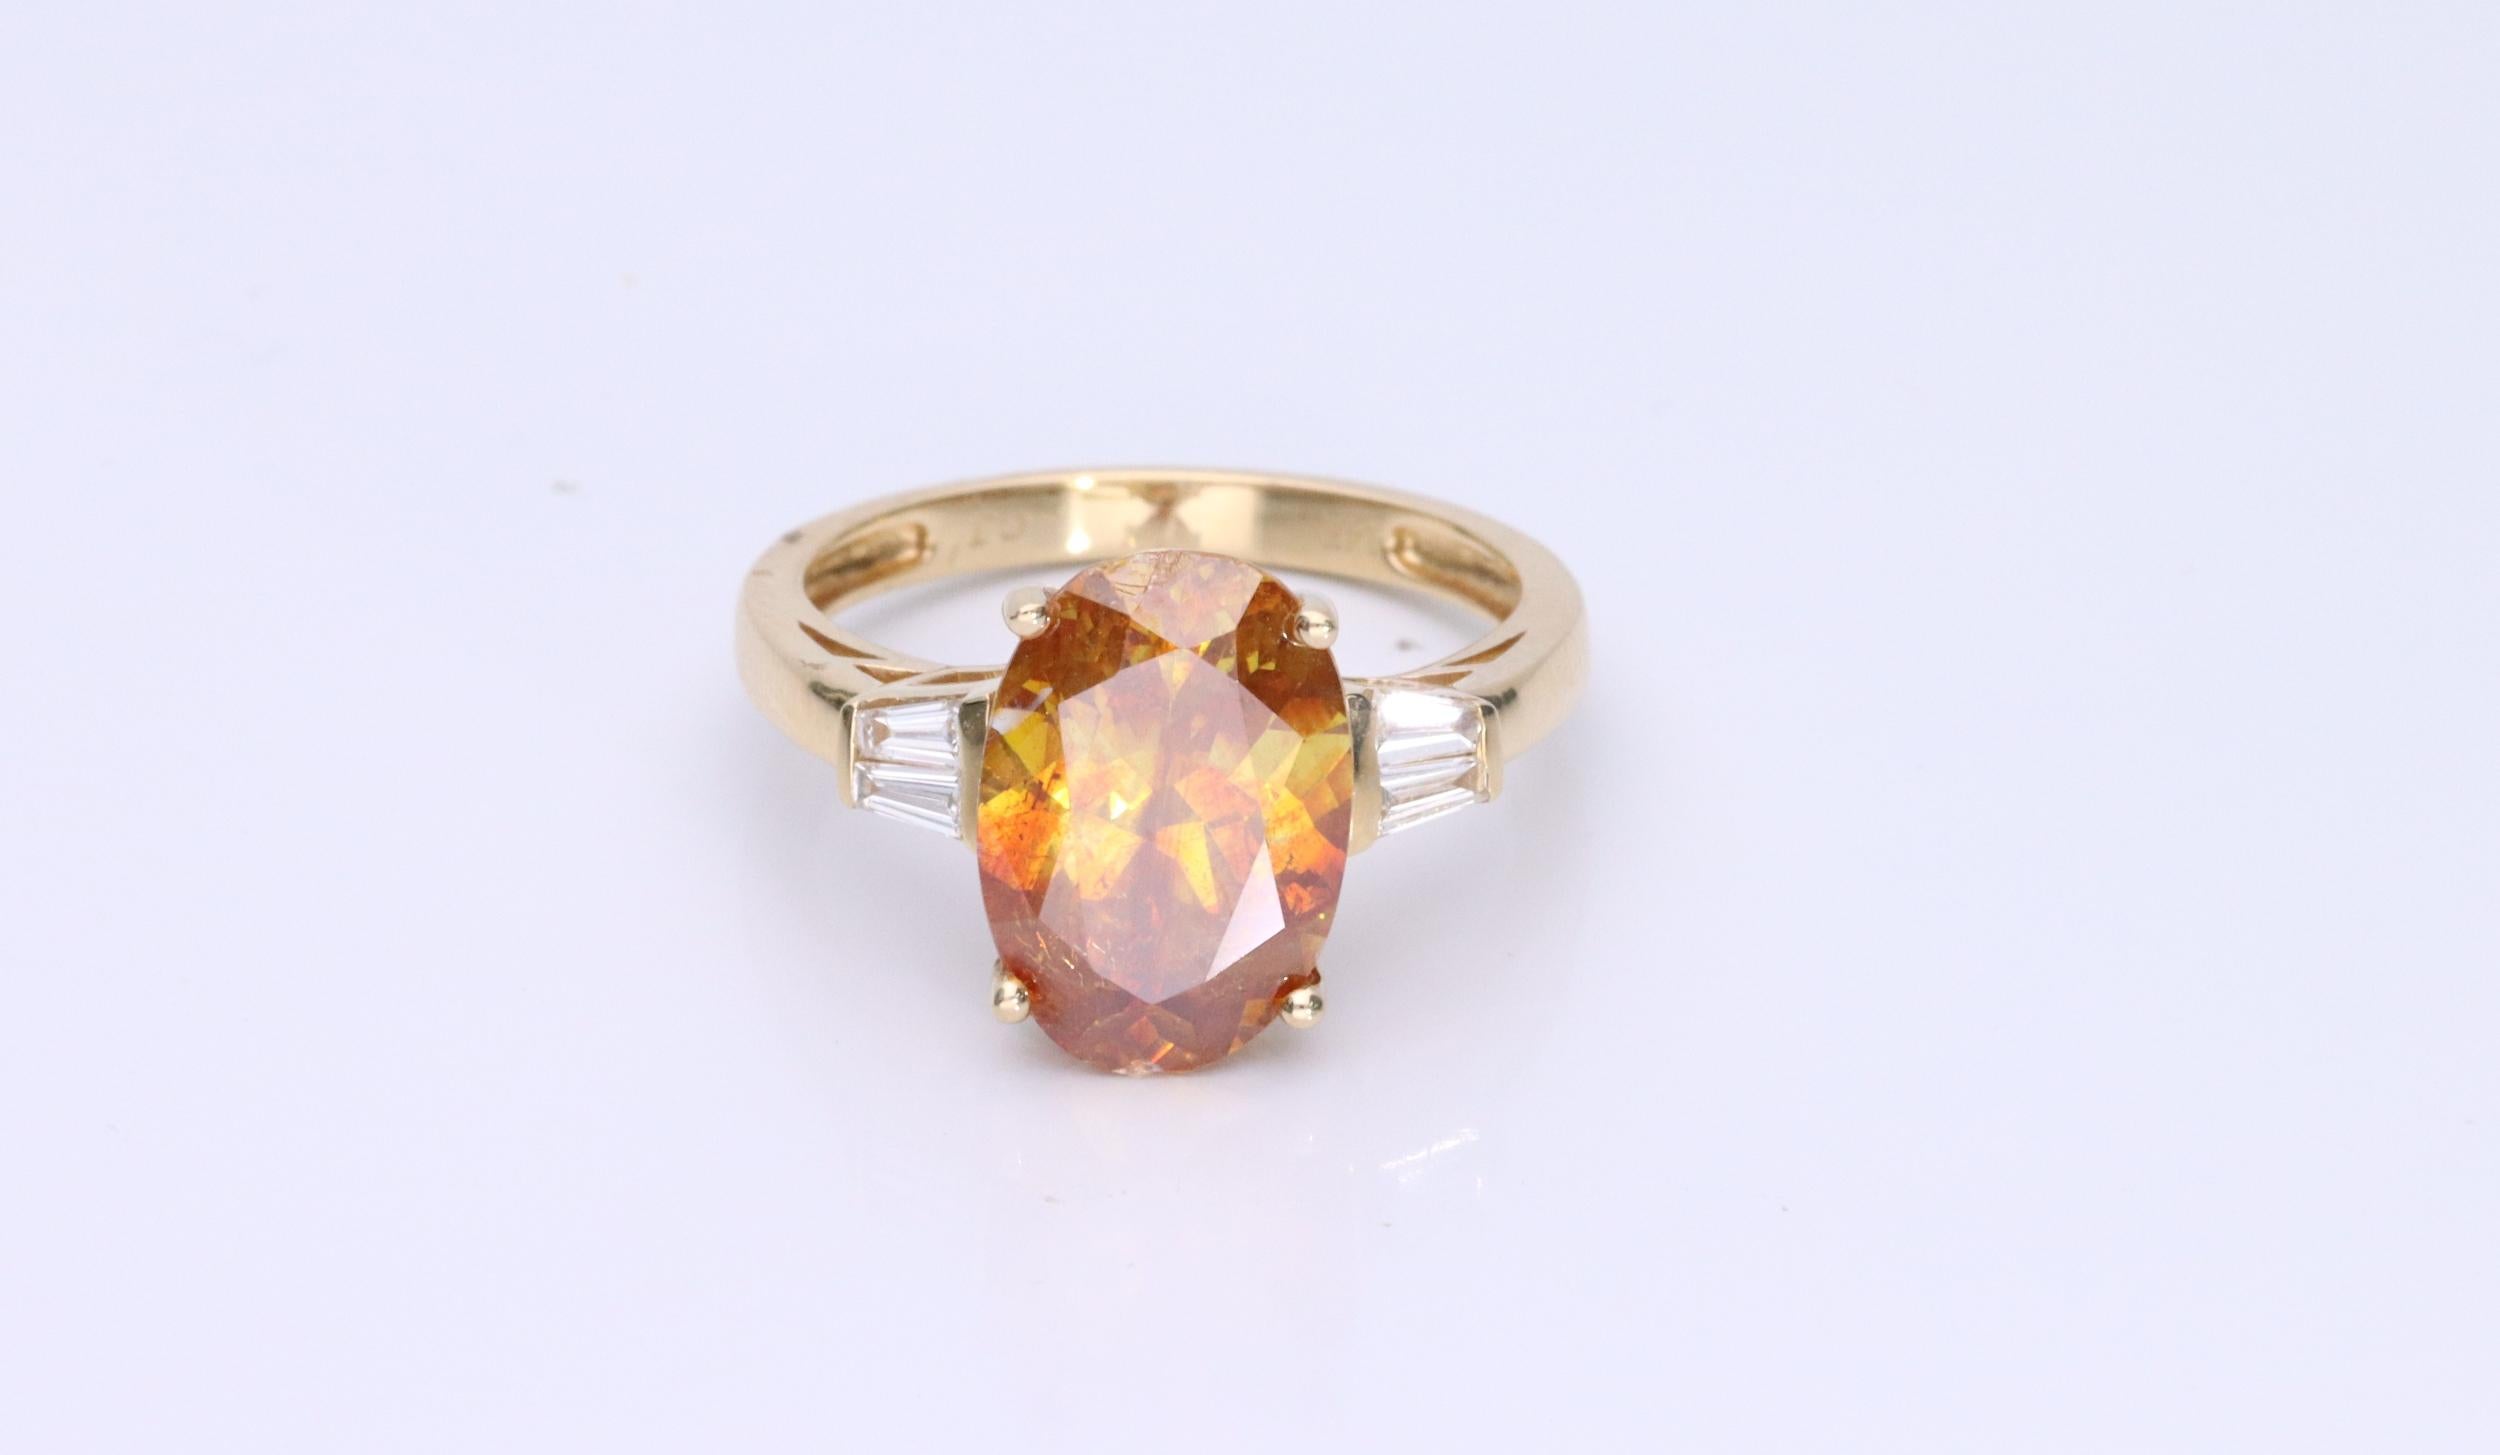 Decorate yourself in elegance with this Ring is crafted from 14-karat Yellow Gold by Gin & Grace. This Ring is made up of Oval-Cut (1 pcs) 8.36 carat Sphalerite and Baguette-cut White Diamond (4 Pcs) 0.18 carat. This Ring is weight 2.70 grams. This